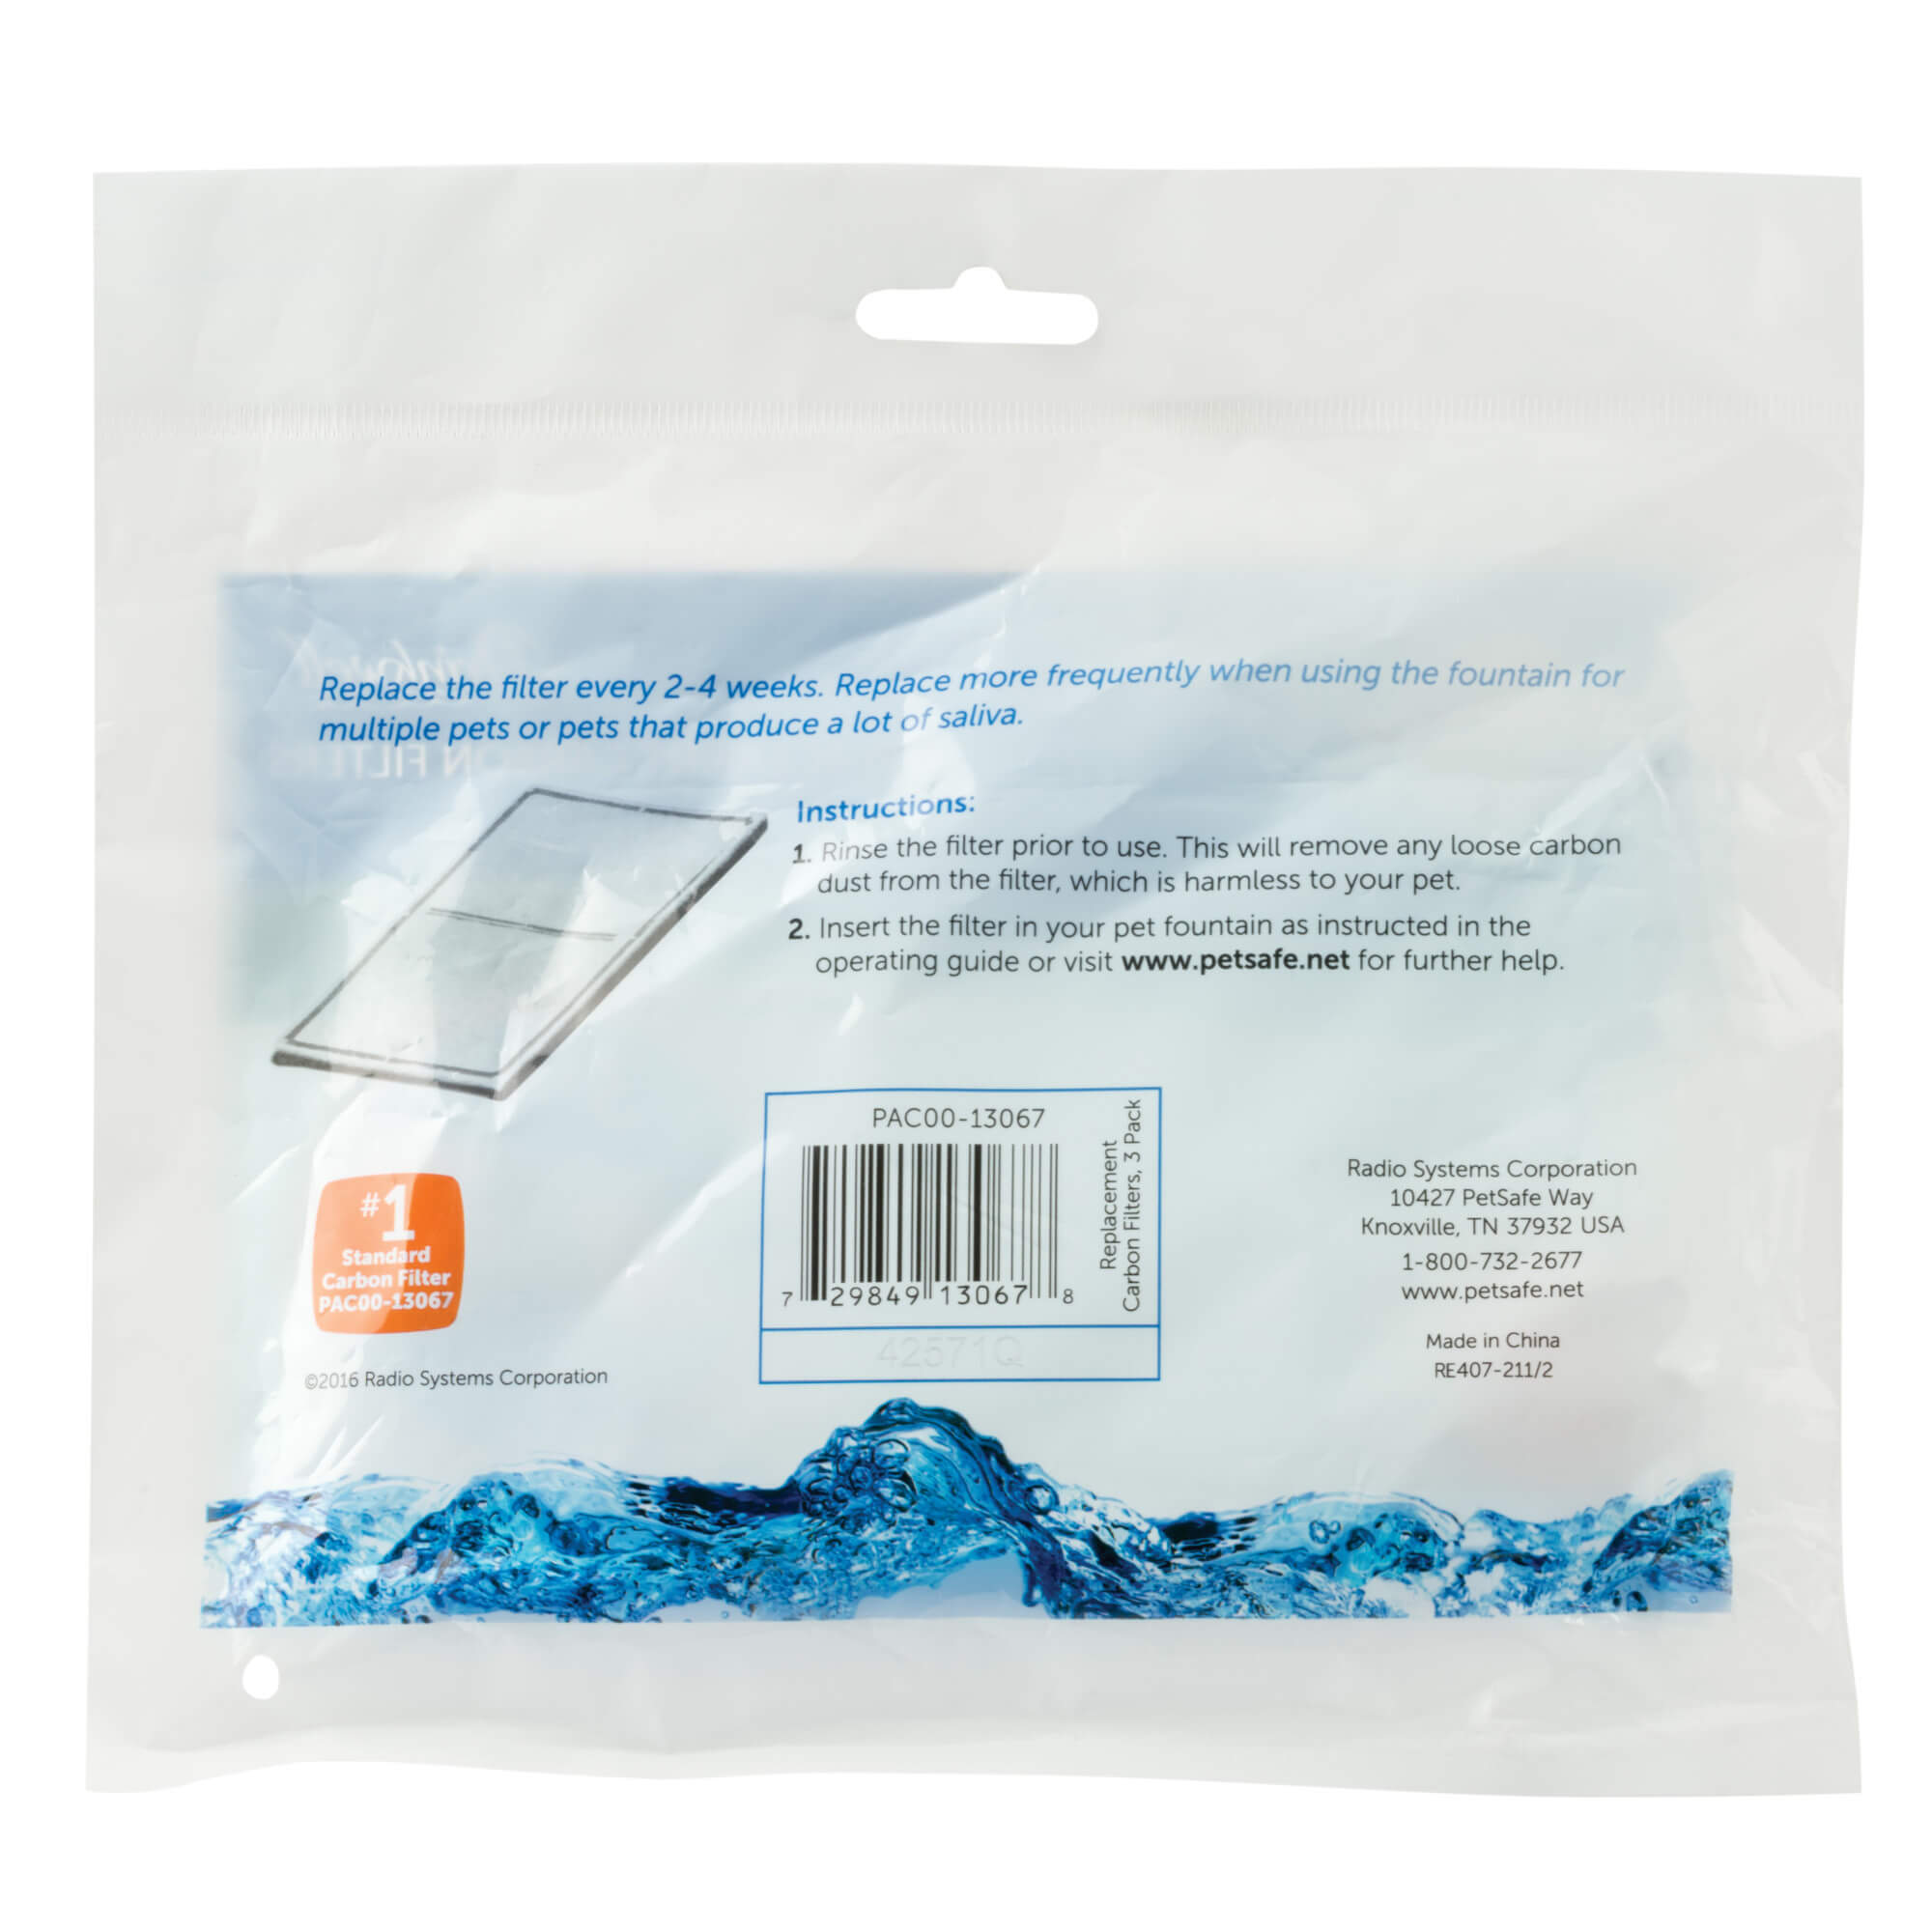 Drinkwell activated carbon replacement filter - back of packaging